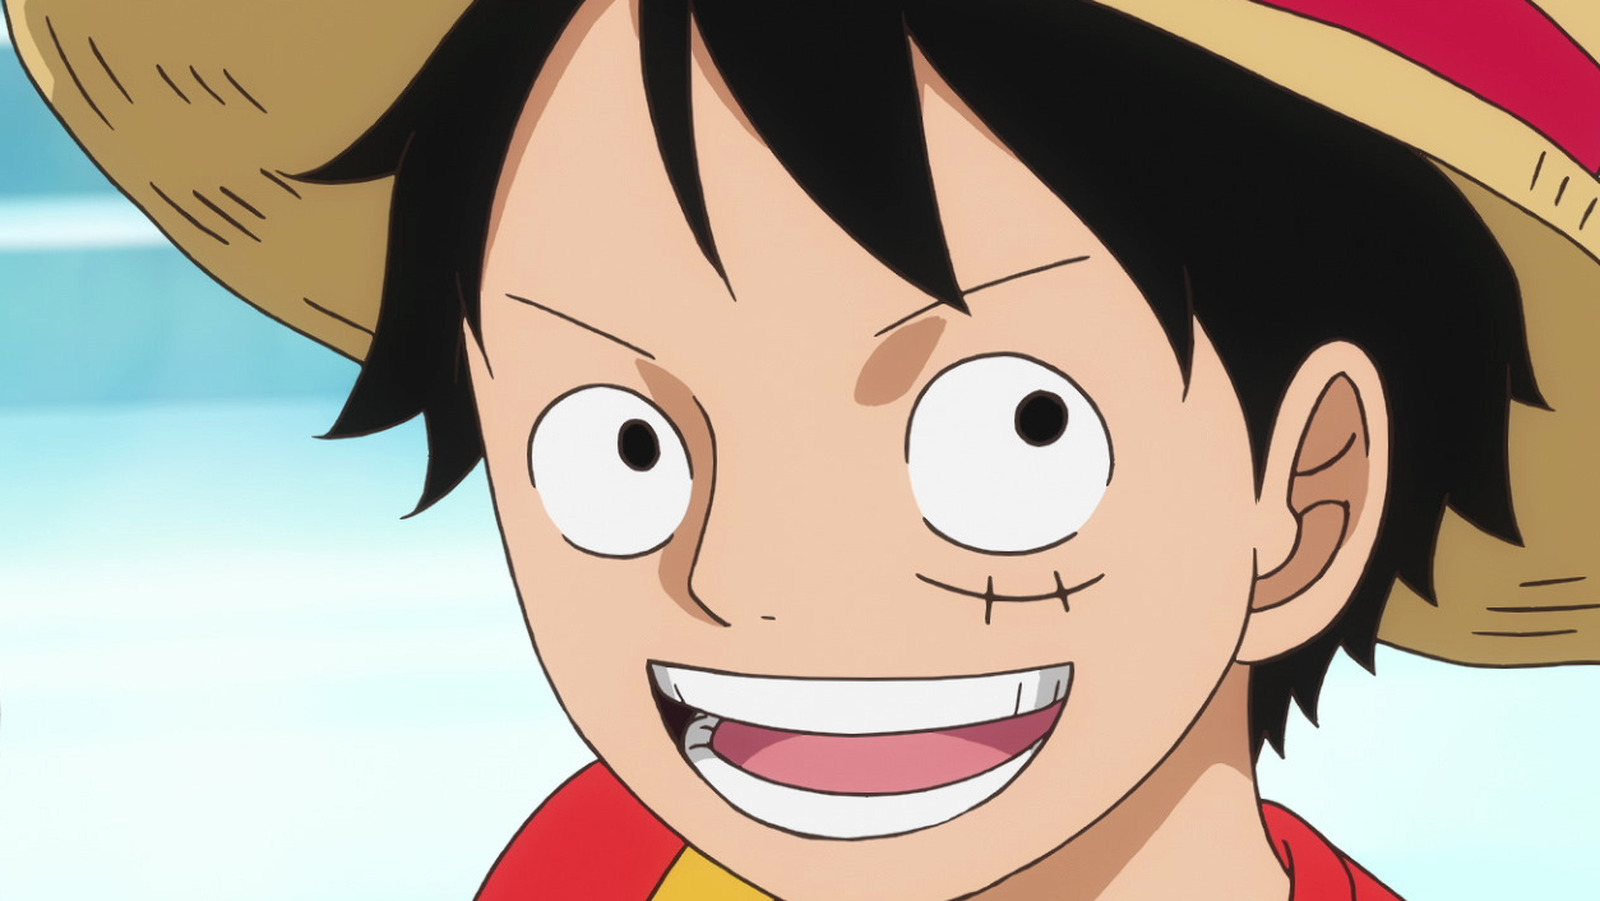 Voice Actor Colleen Clinkenbeard On Voicing One Piece's Monkey D. Luffy For  15 Years [Exclusive Interview]